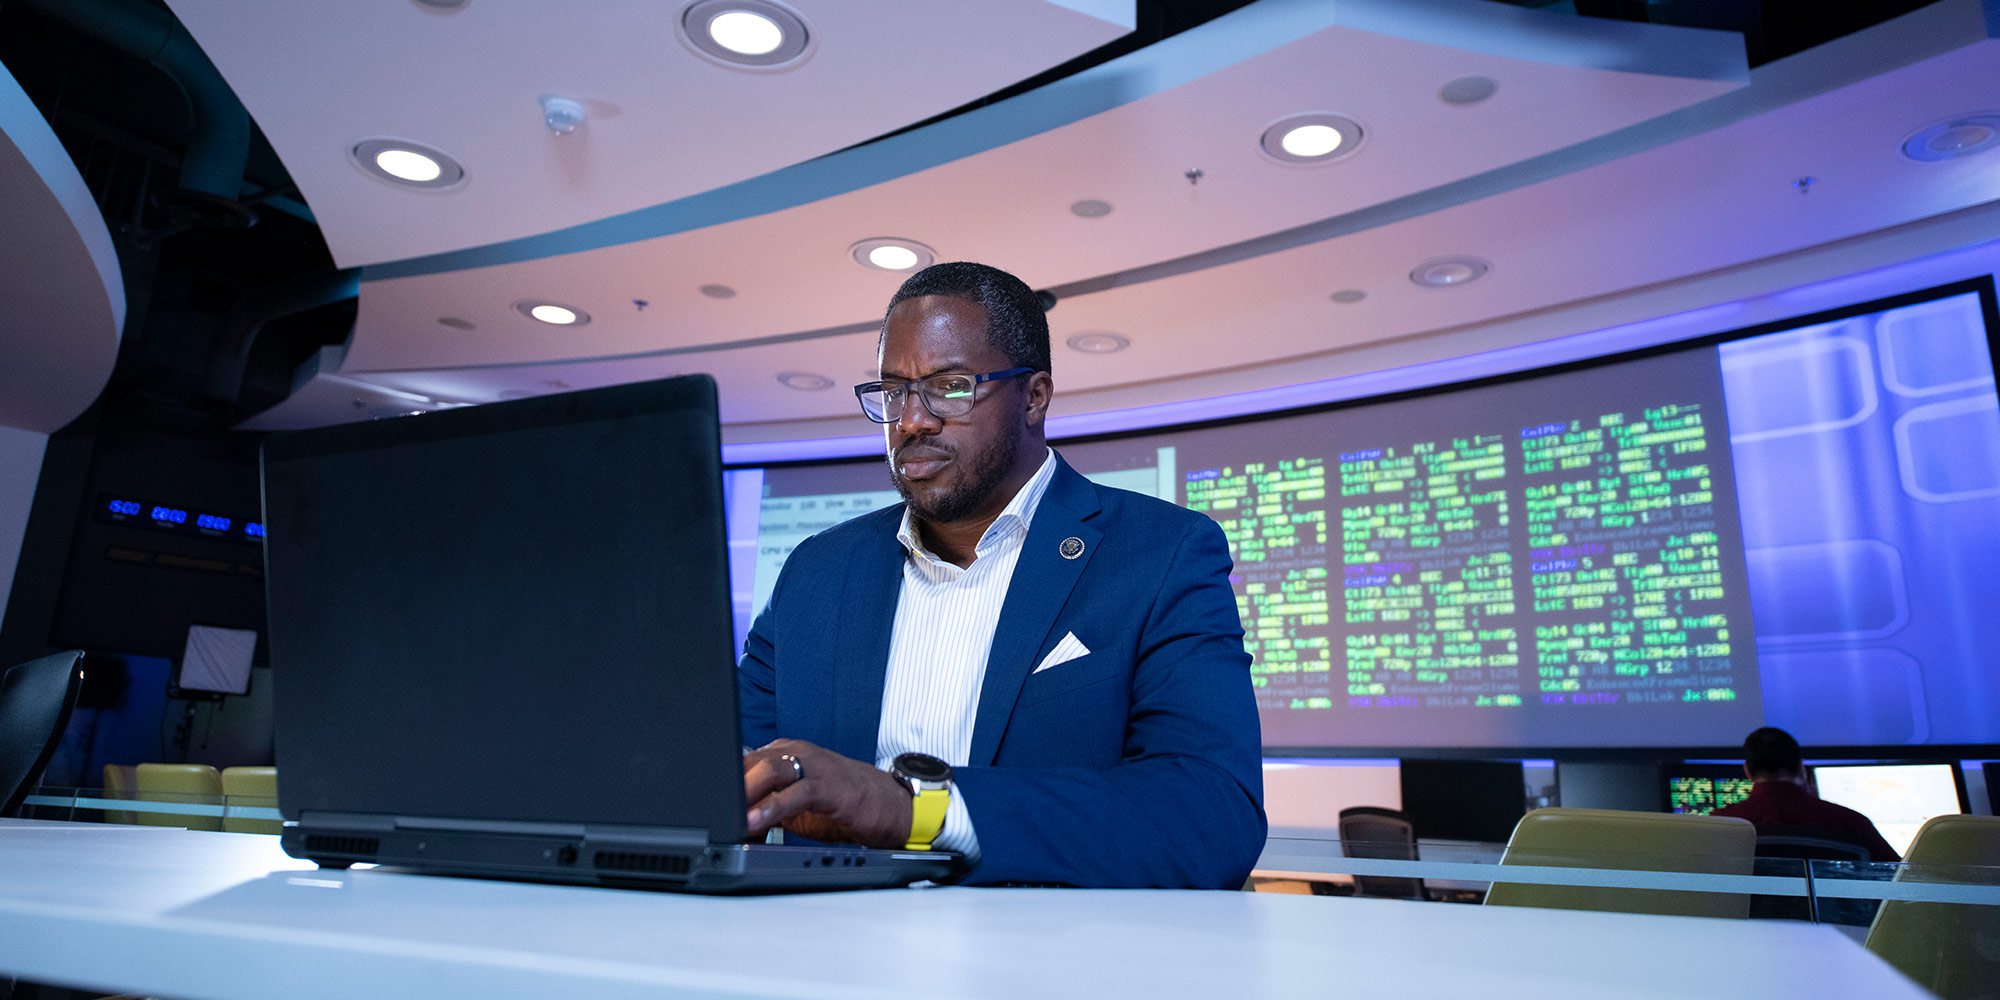 Black male on computer in cyber room